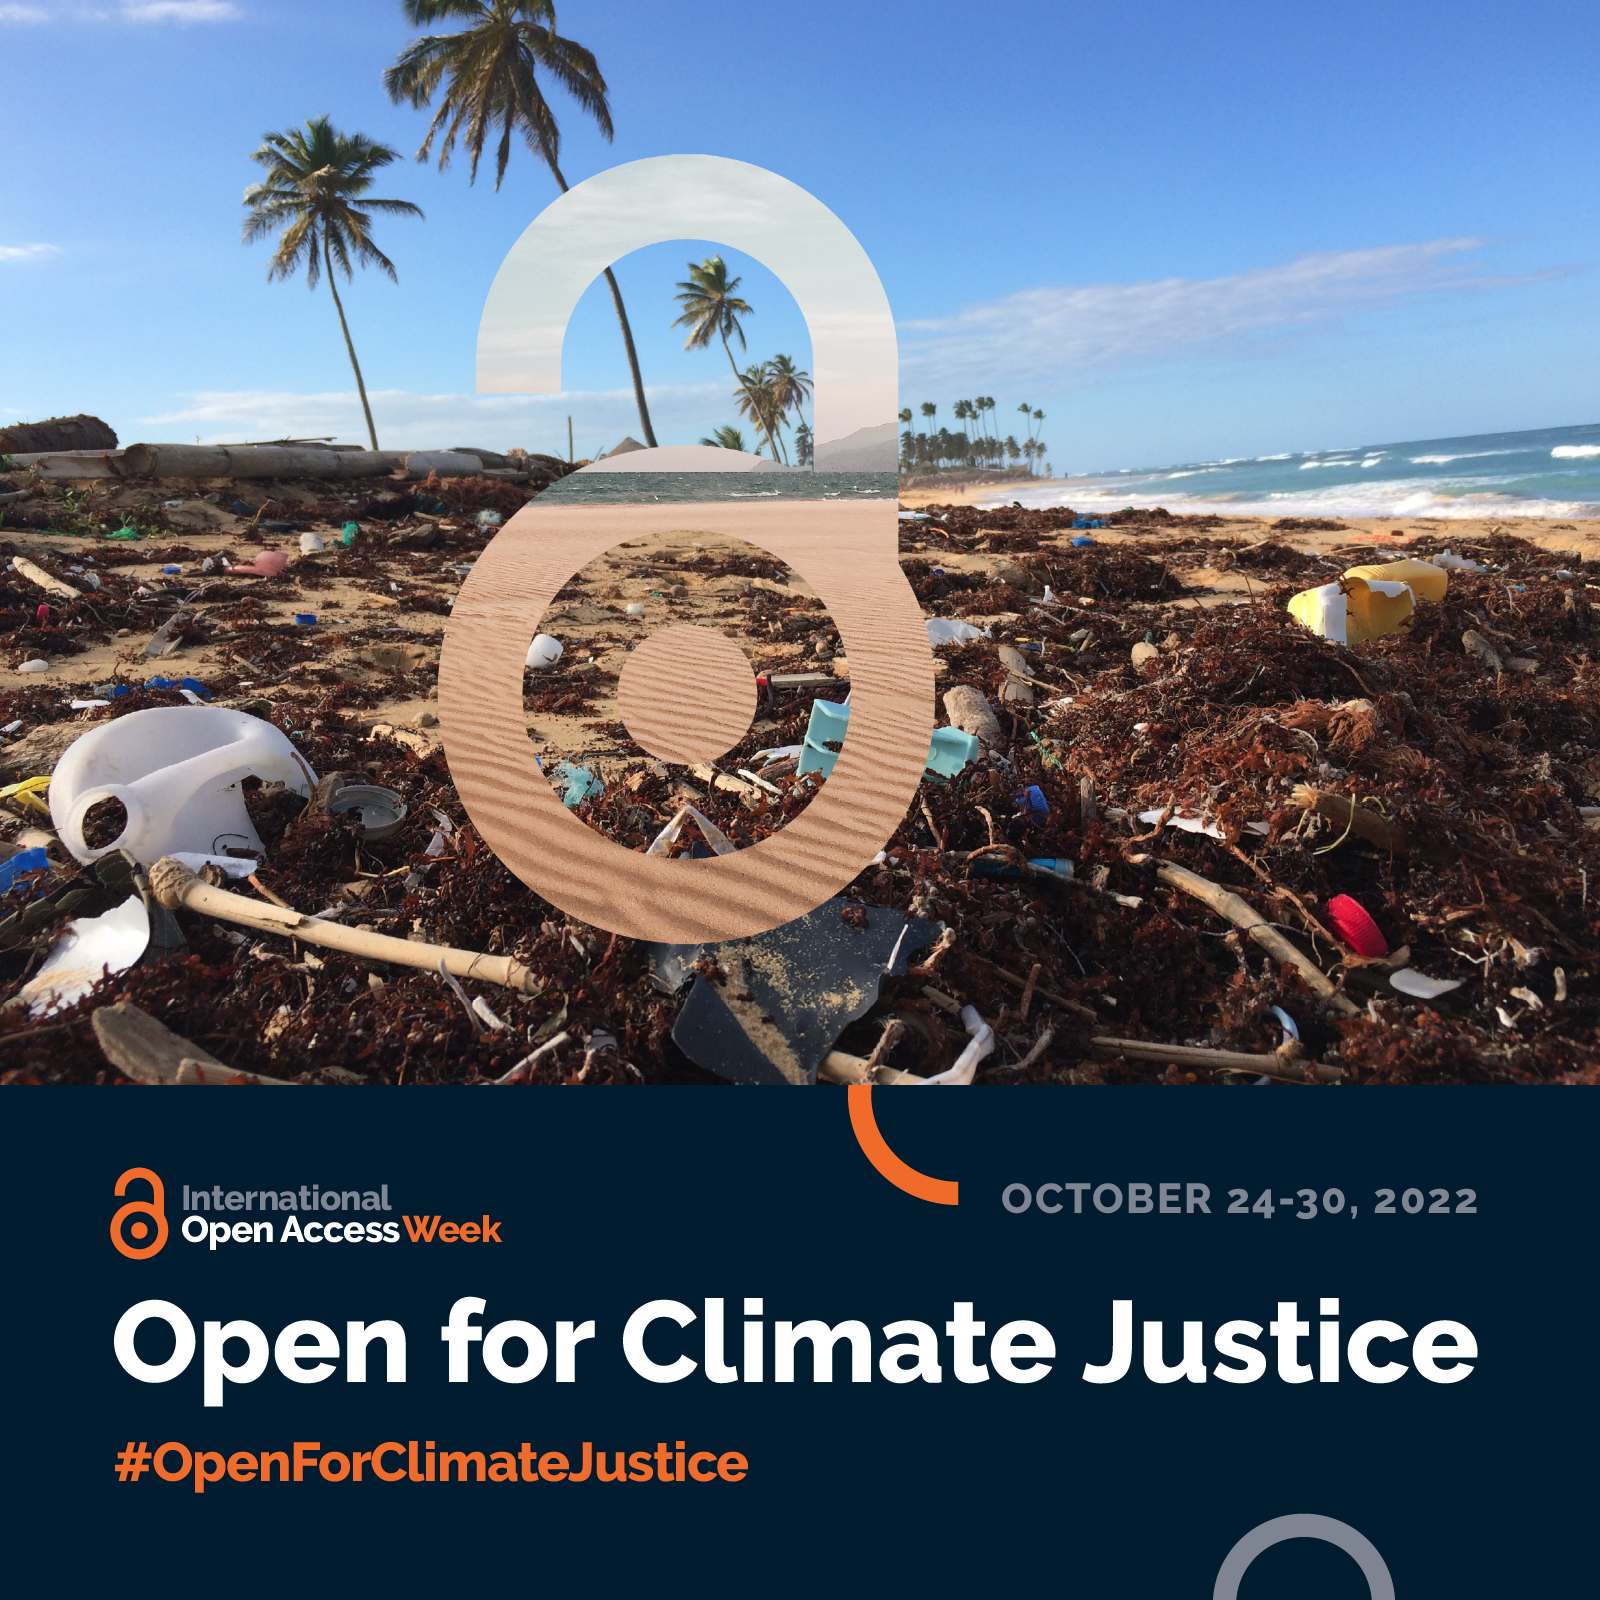 Image of a beach advertising Open Access Week's theme of Climate Justice